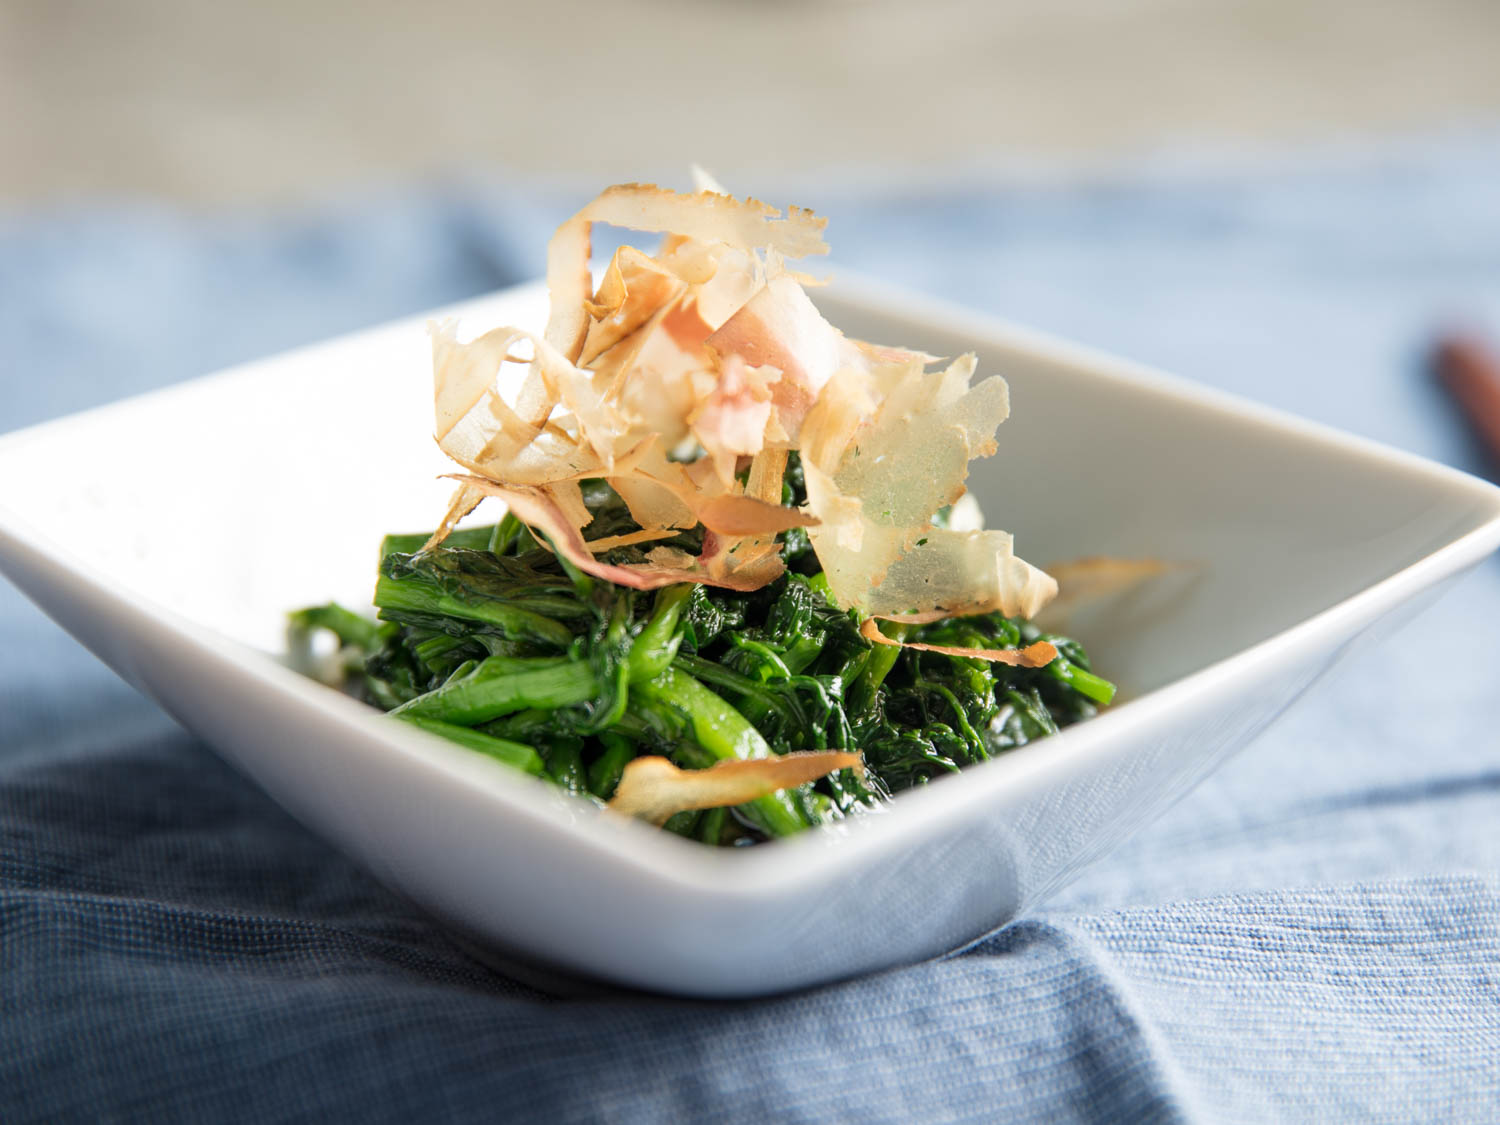 Ohitashi (Japanese Blanched Greens With Savory Broth)